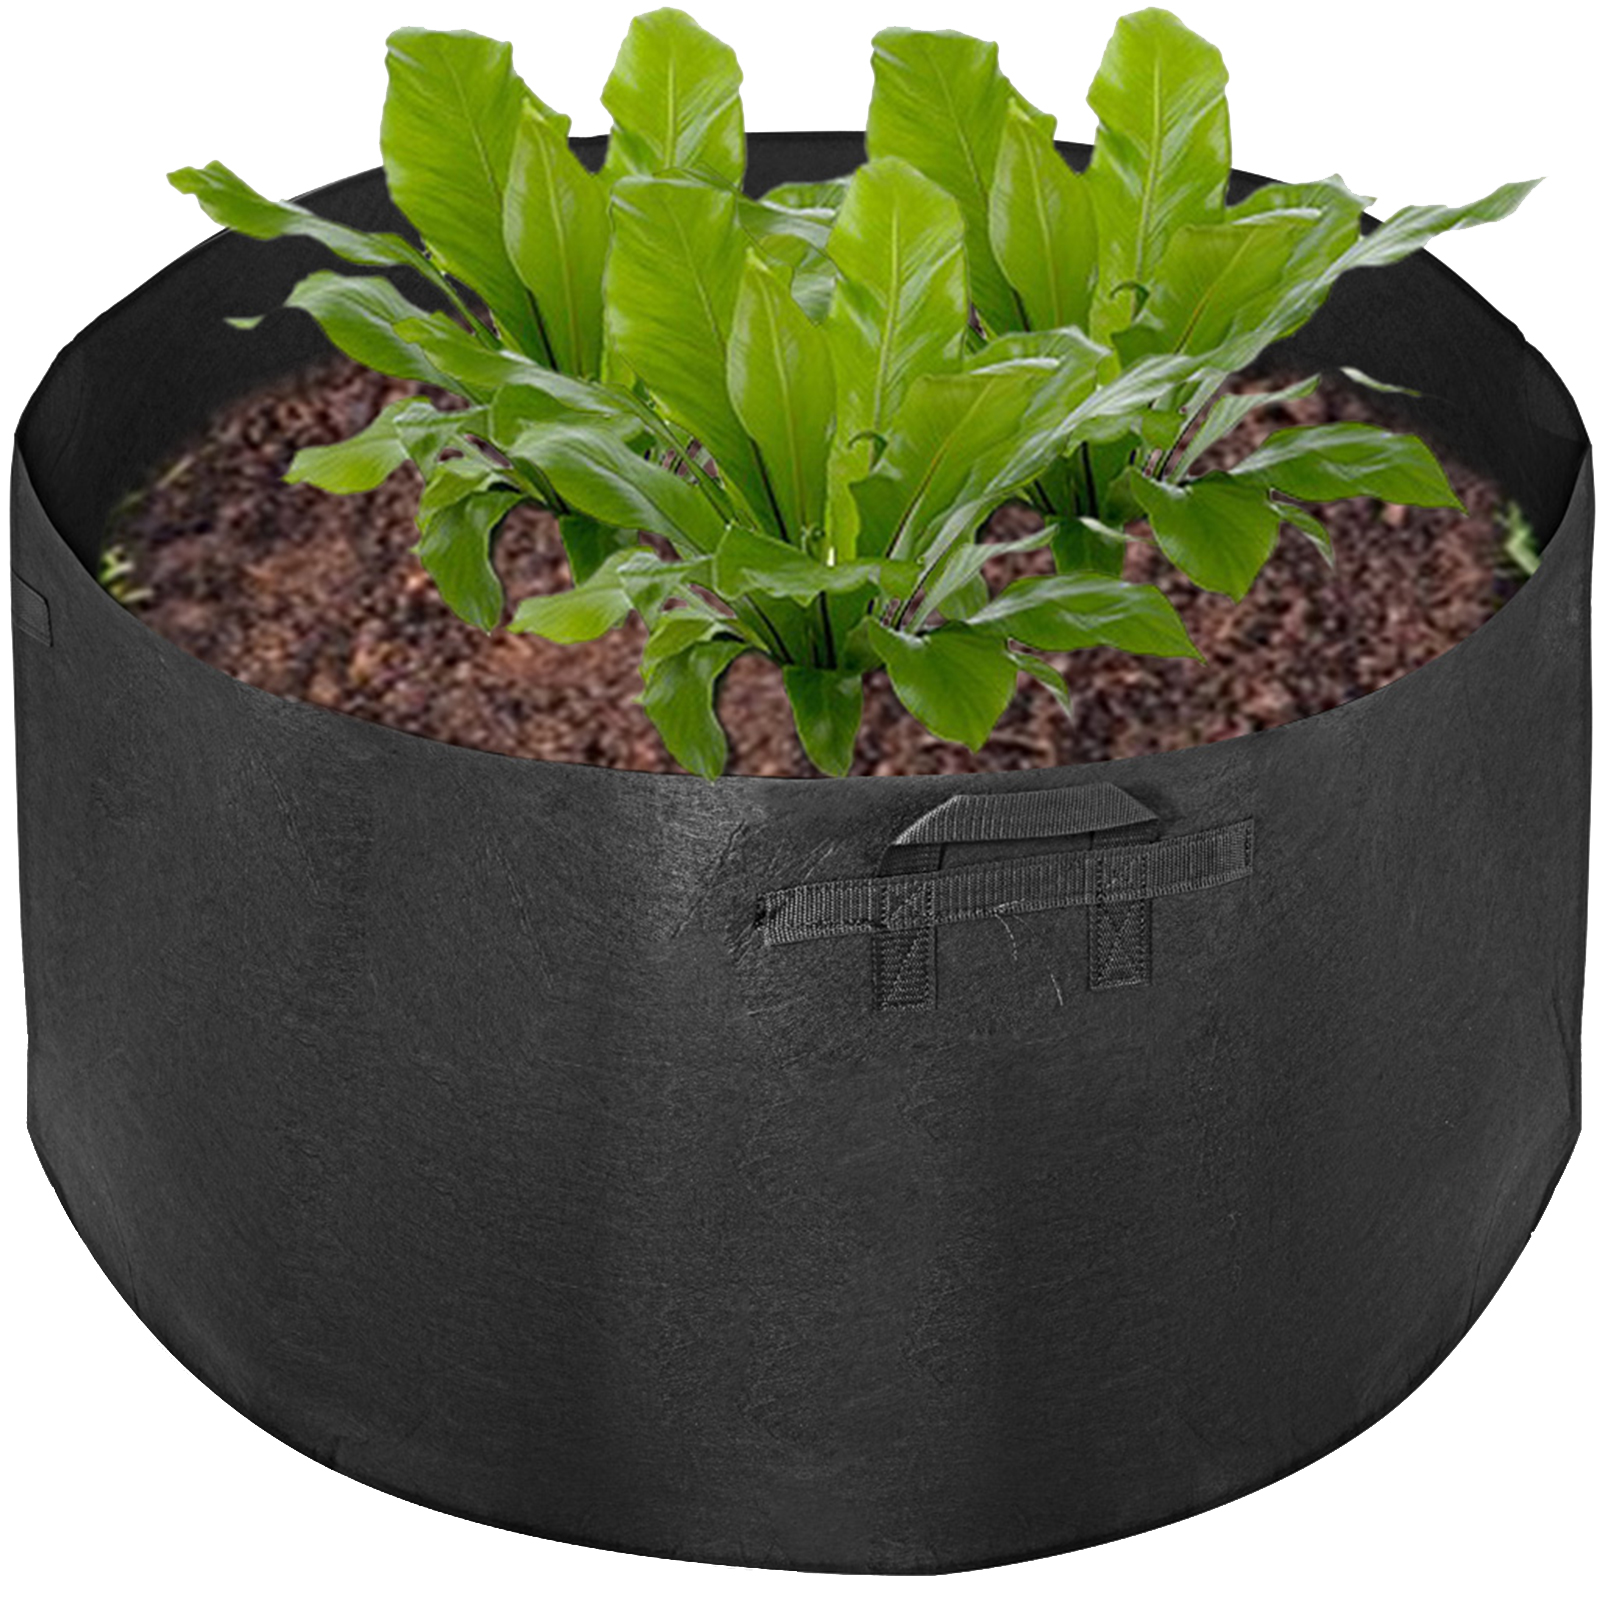 Grow Bags 10 Gallon Garden Planting Bag Aeration Fabric Pot with Handles for Planter 5 Pack 